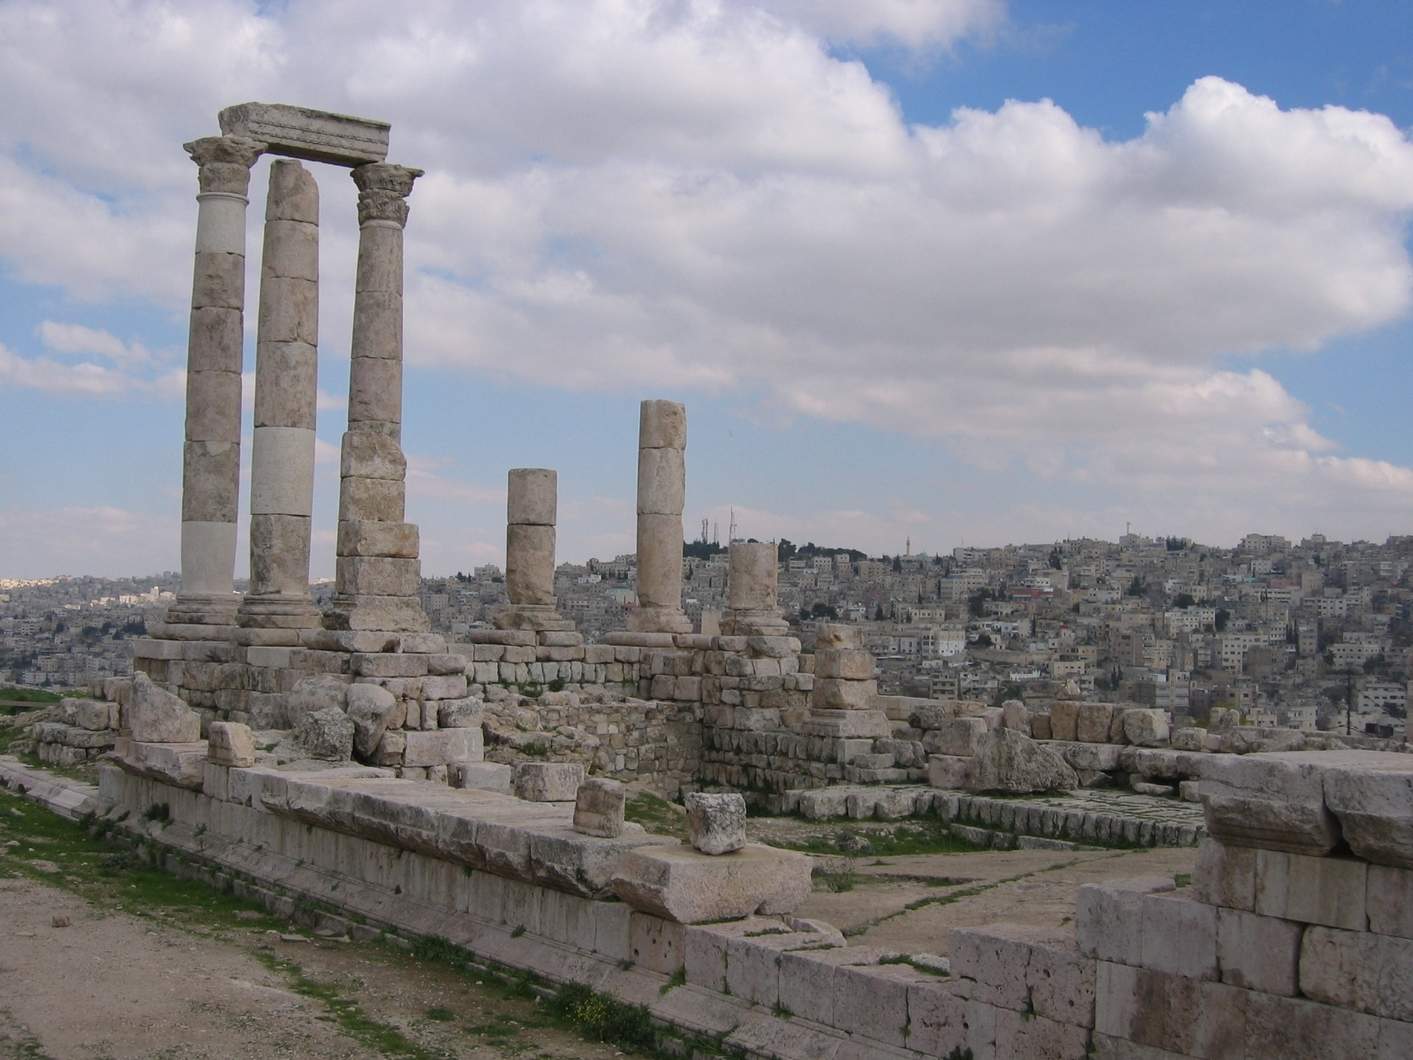 The towering columns of the Great Roman Temple on Jabal al-Qal’a dominate the skyline of Amman’s historic downtown. The columns and surmounting architrave were erected in 1993 as part of an ACOR-directed initiative. Photo by Glenn J. Corbett.